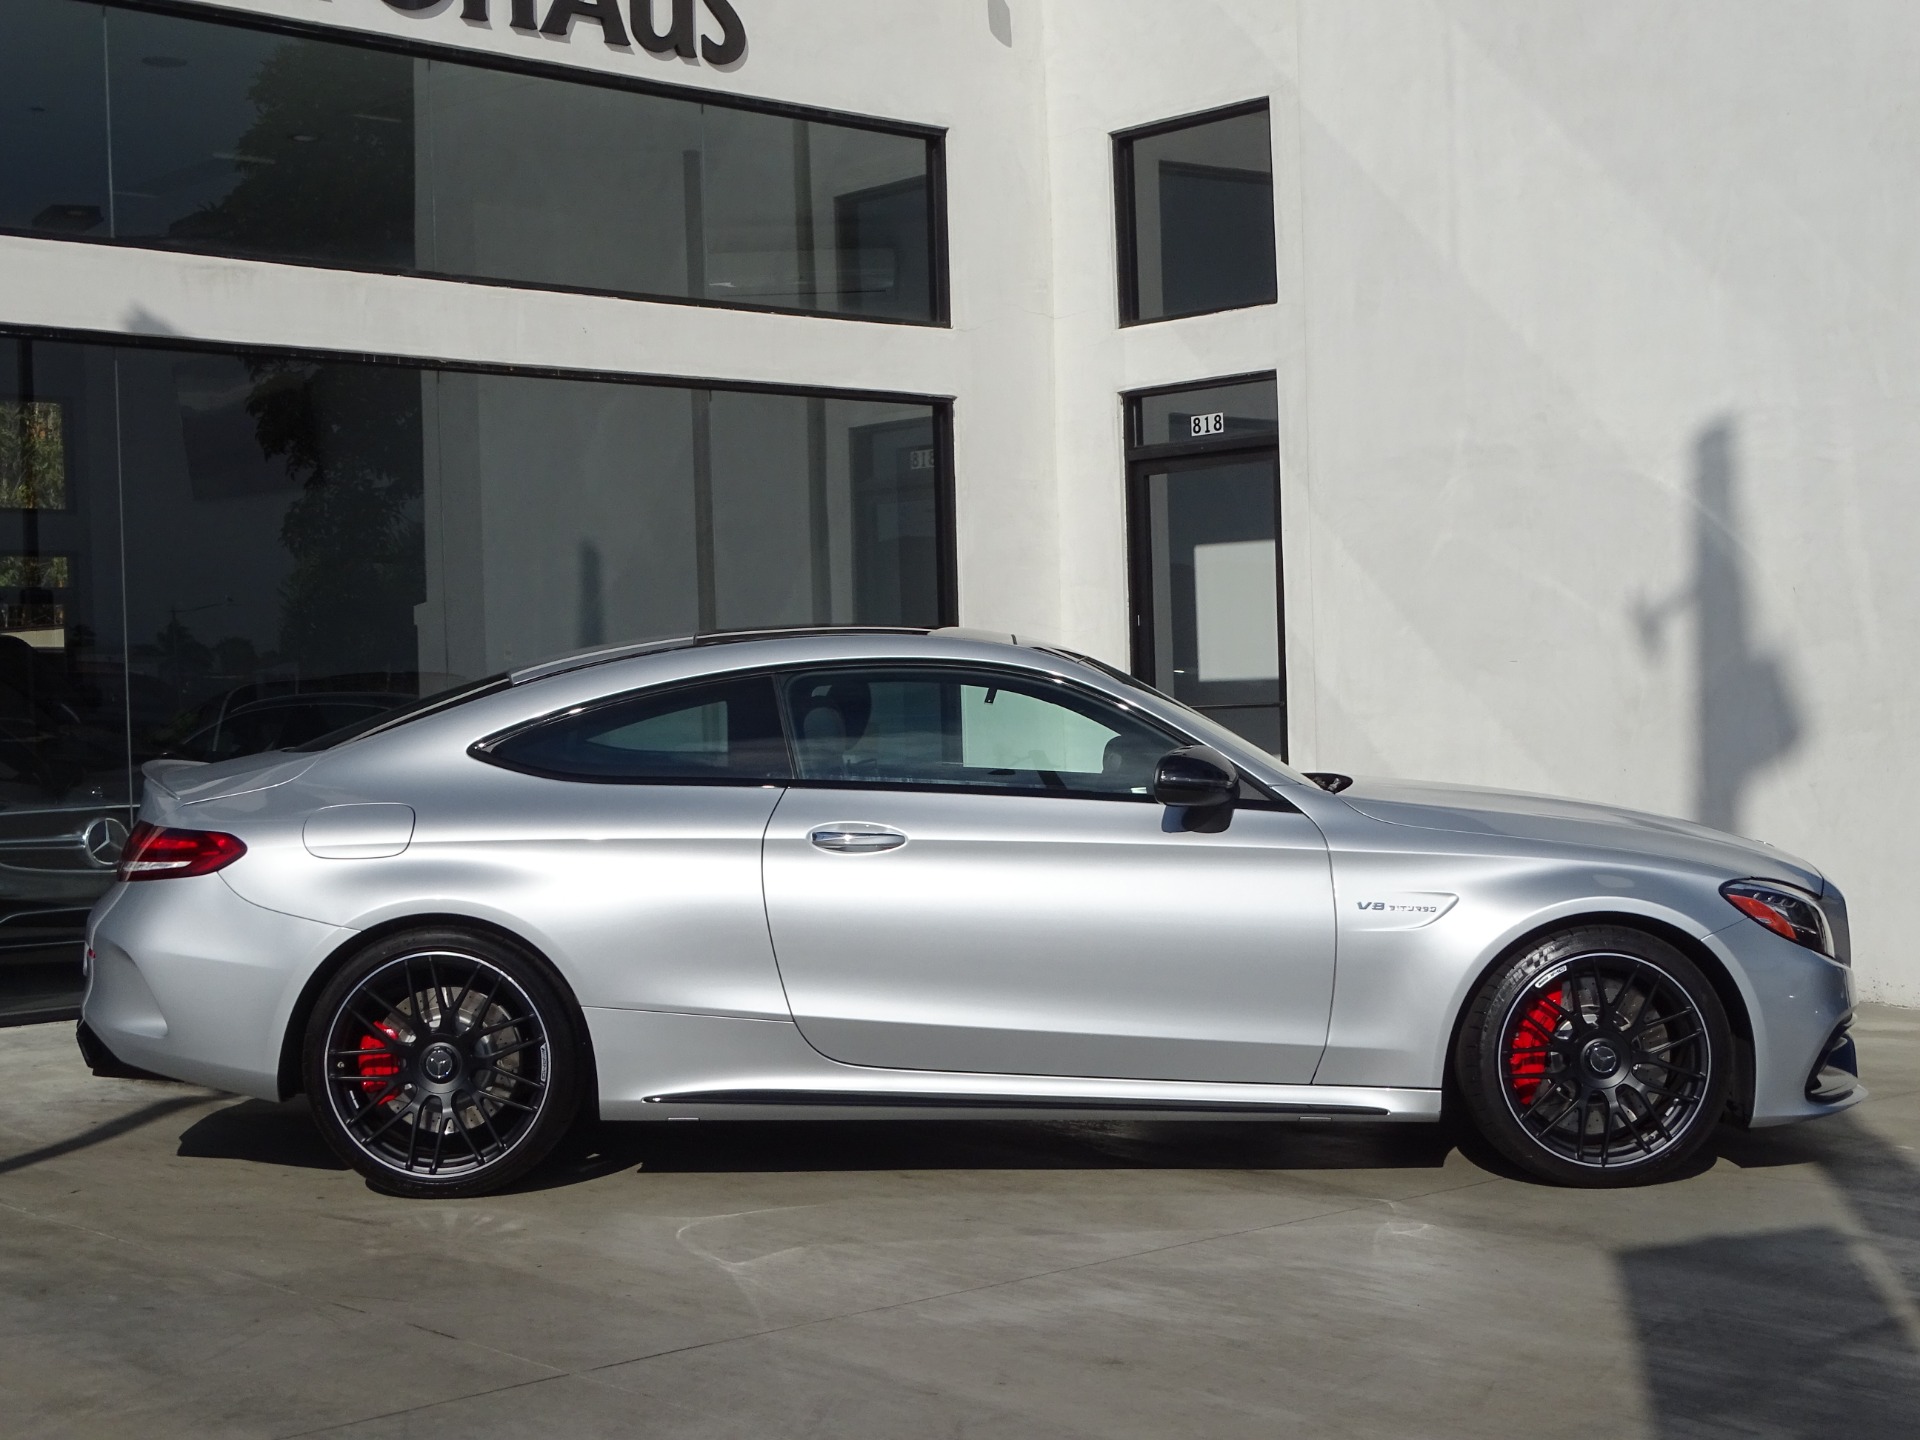 2019 Mercedes-Benz C-Class AMG C 63 S Stock # 7077 for sale near ...